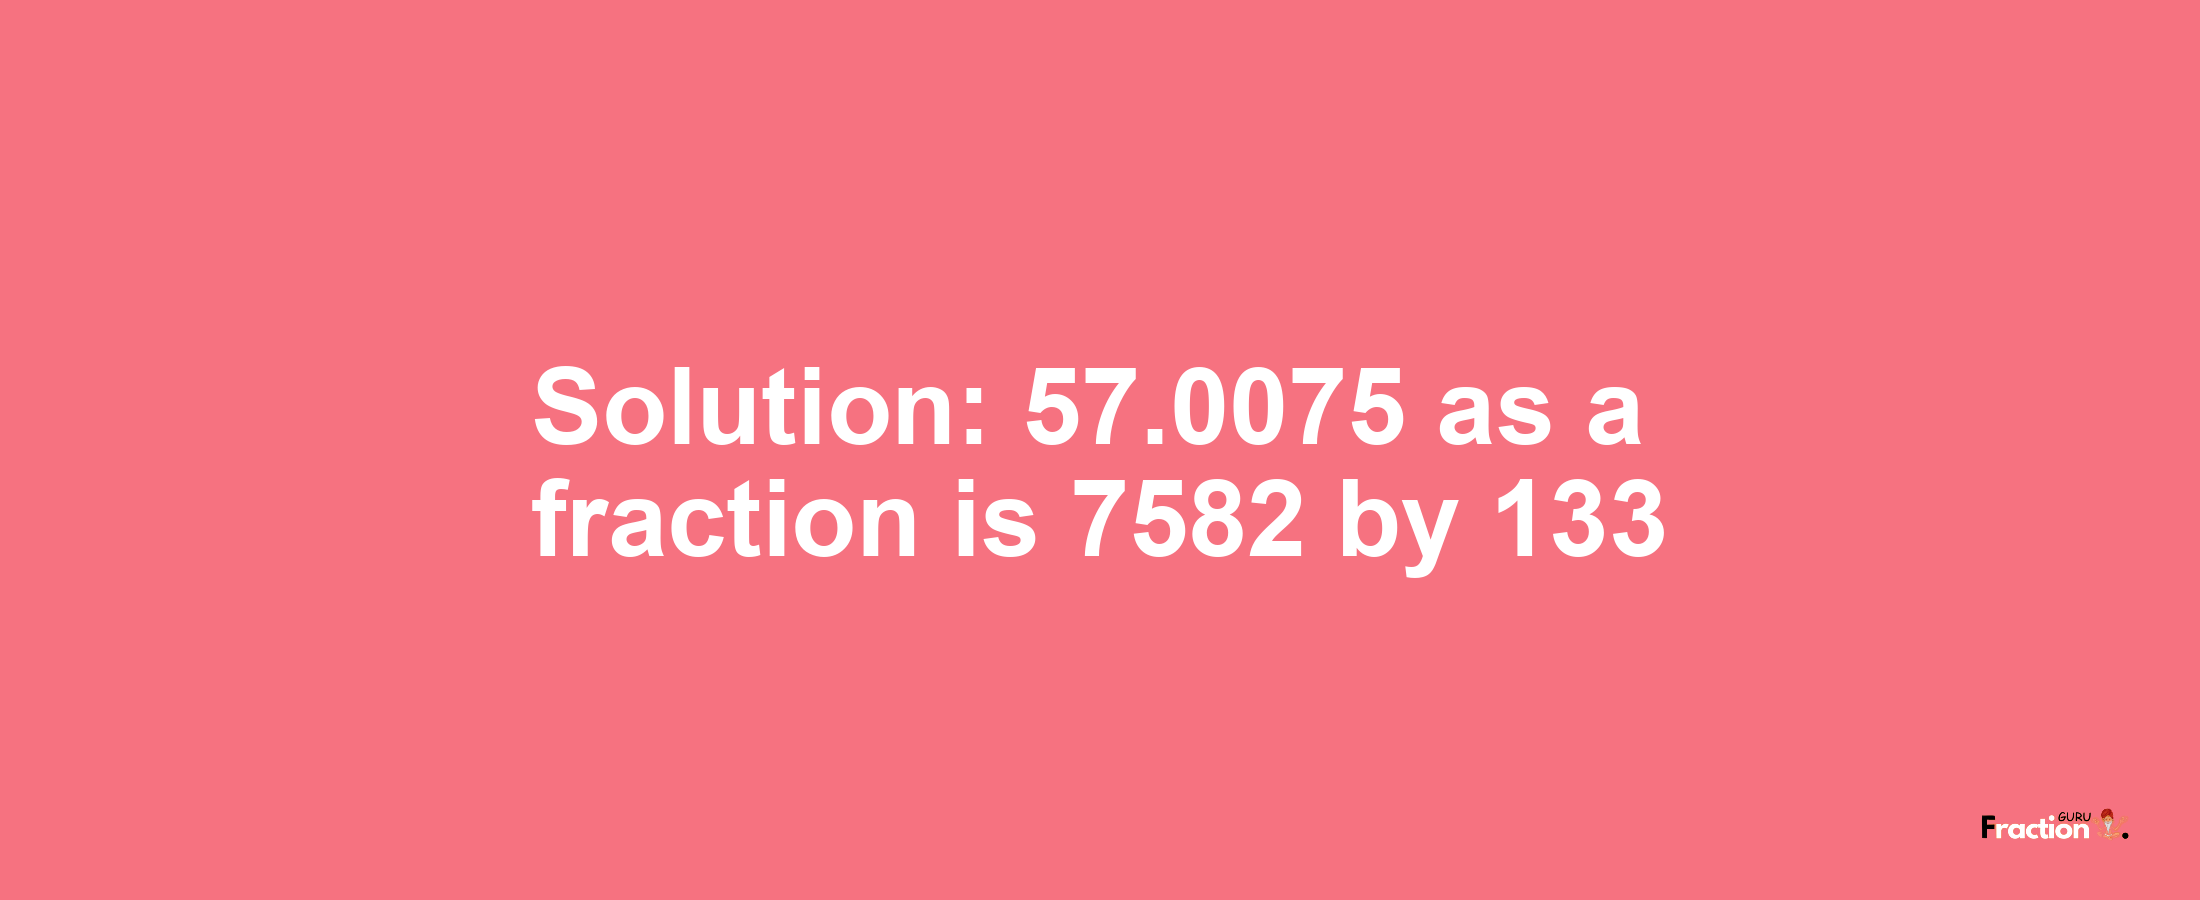 Solution:57.0075 as a fraction is 7582/133